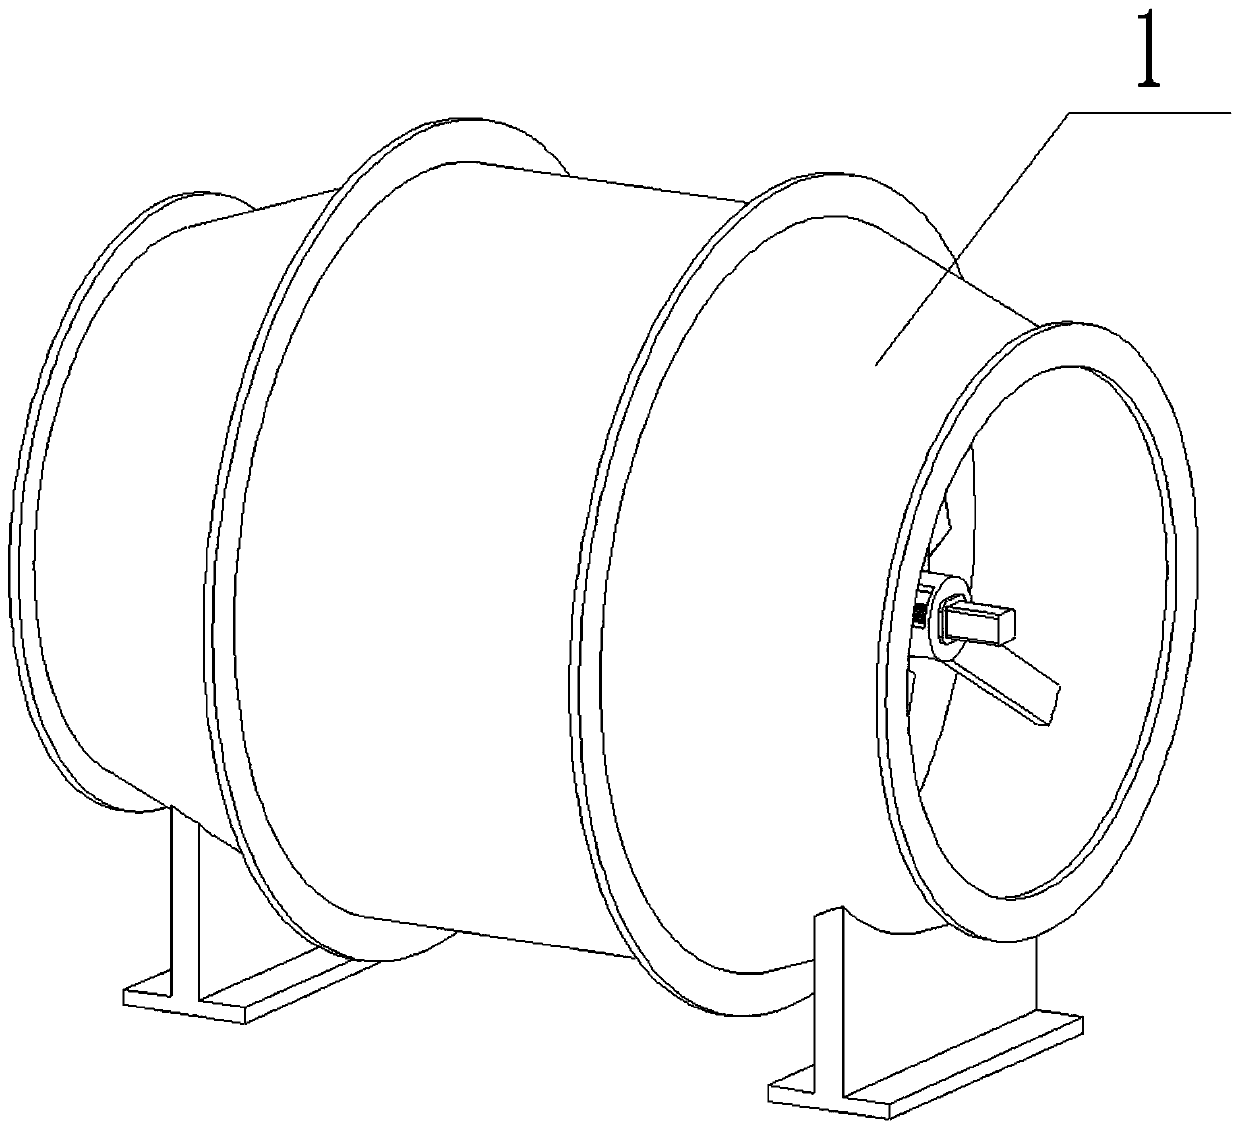 Axial flow fan with adjustable blades